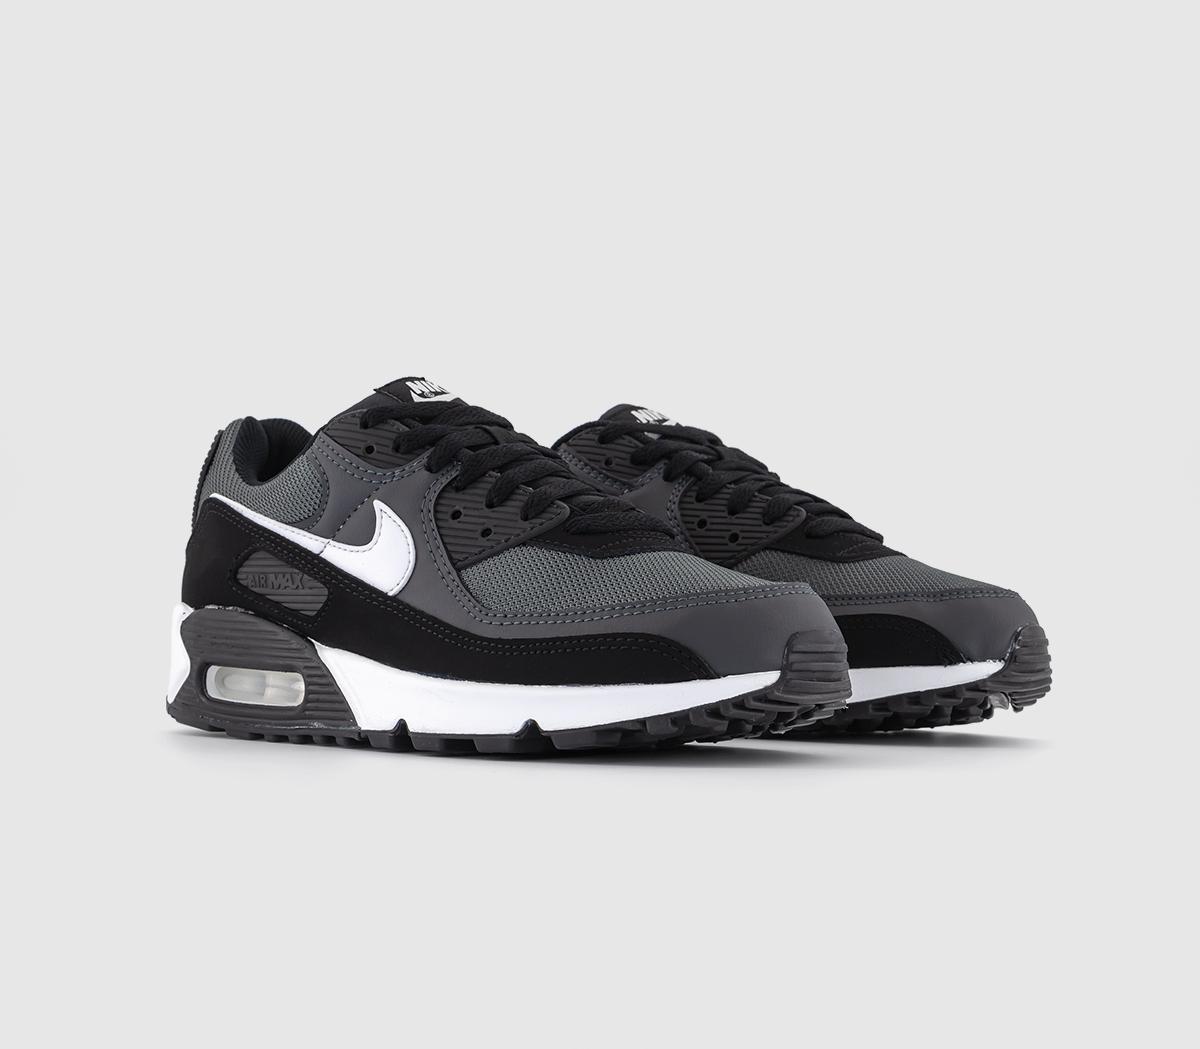 Nike Air Max 90 Trainers Black White Leather - His trainers